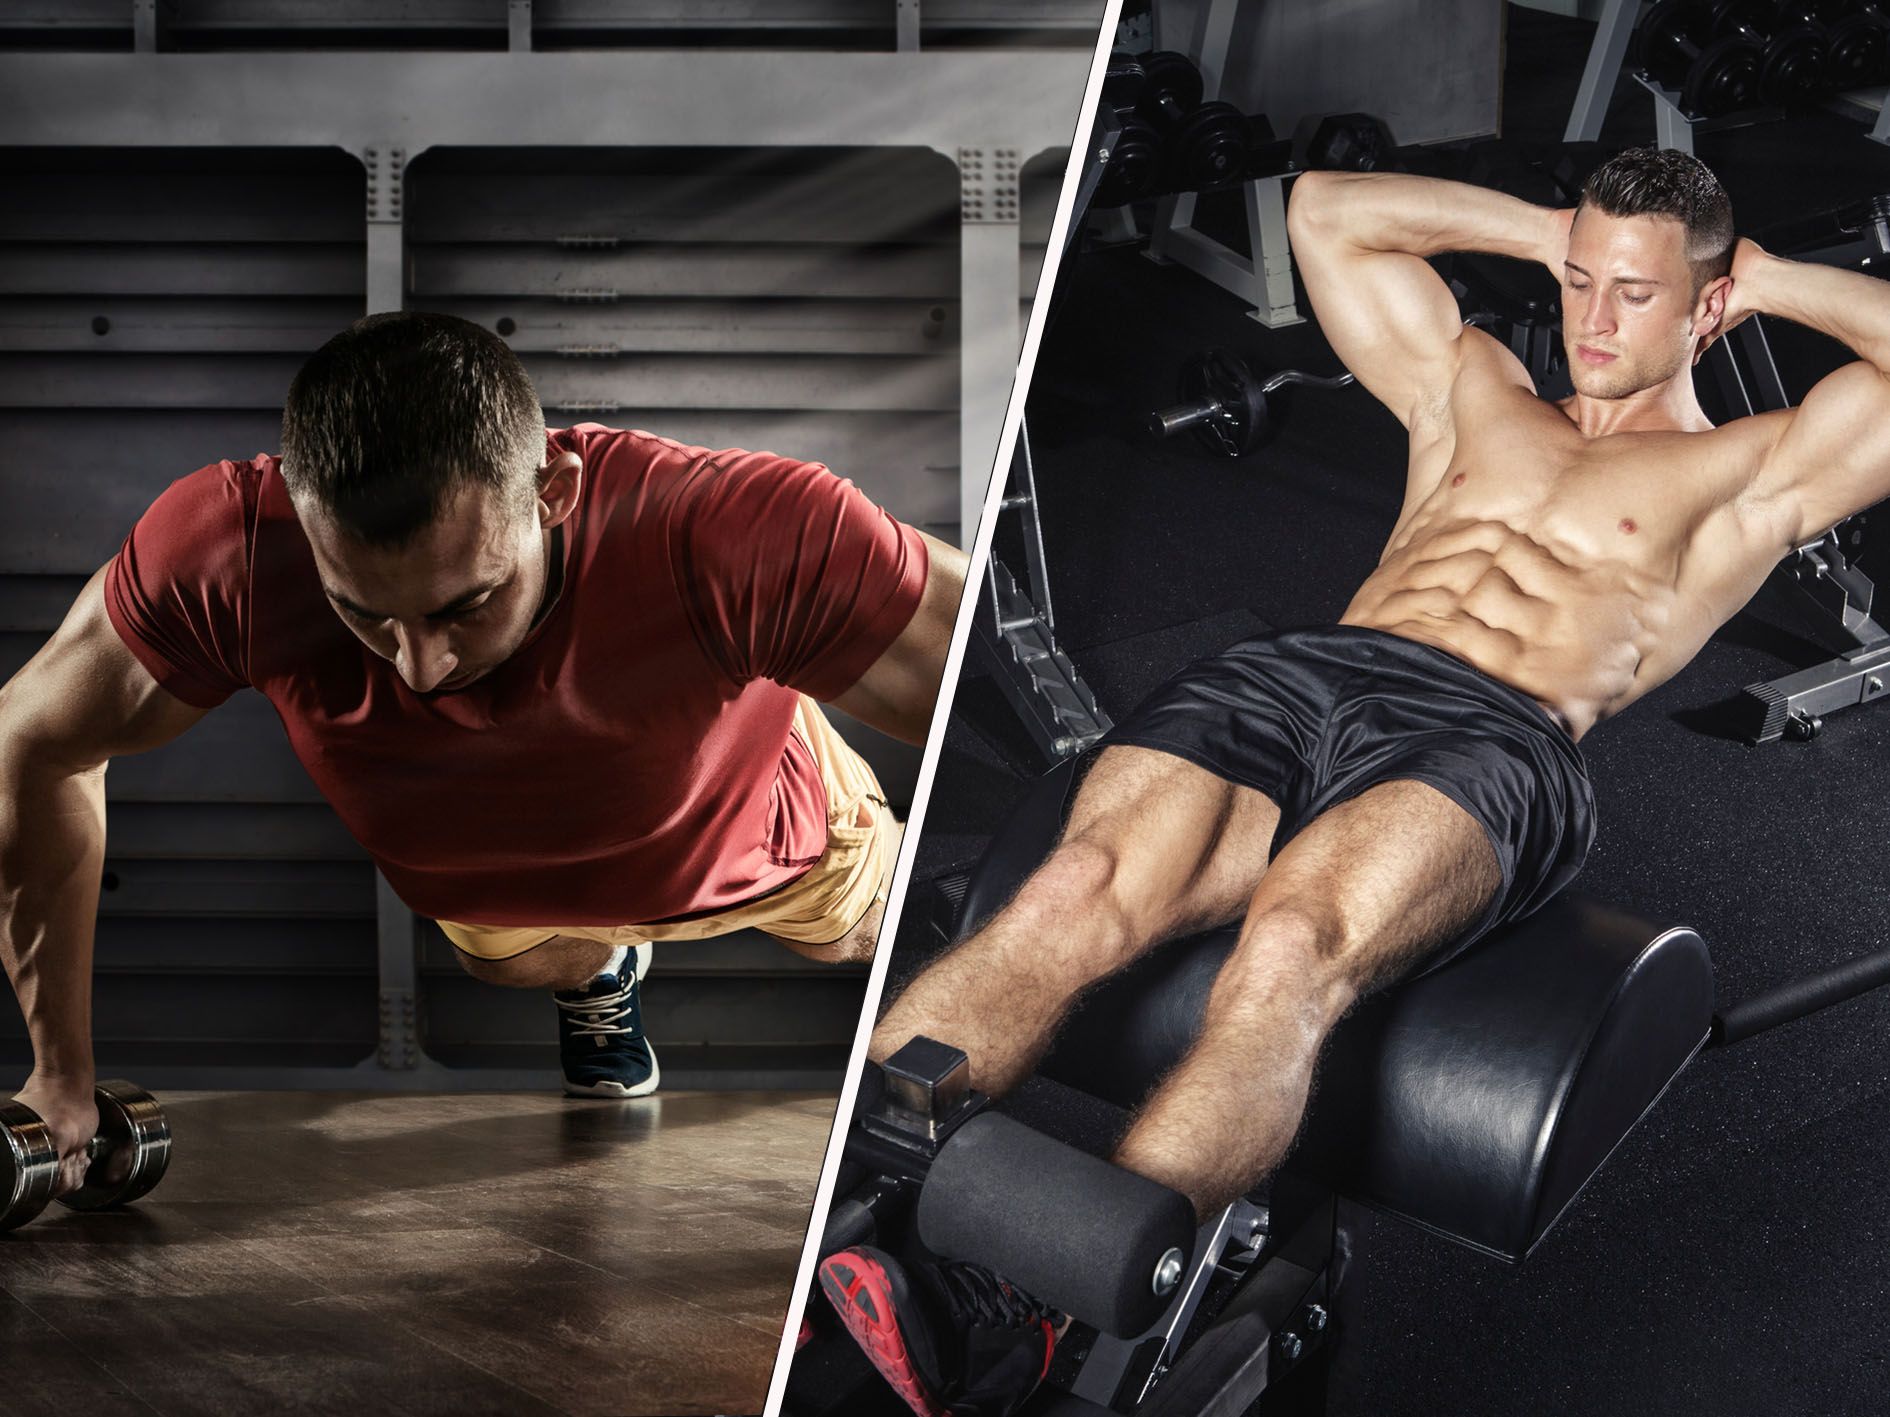 How to Do Crunches to Strengthen Your Abs